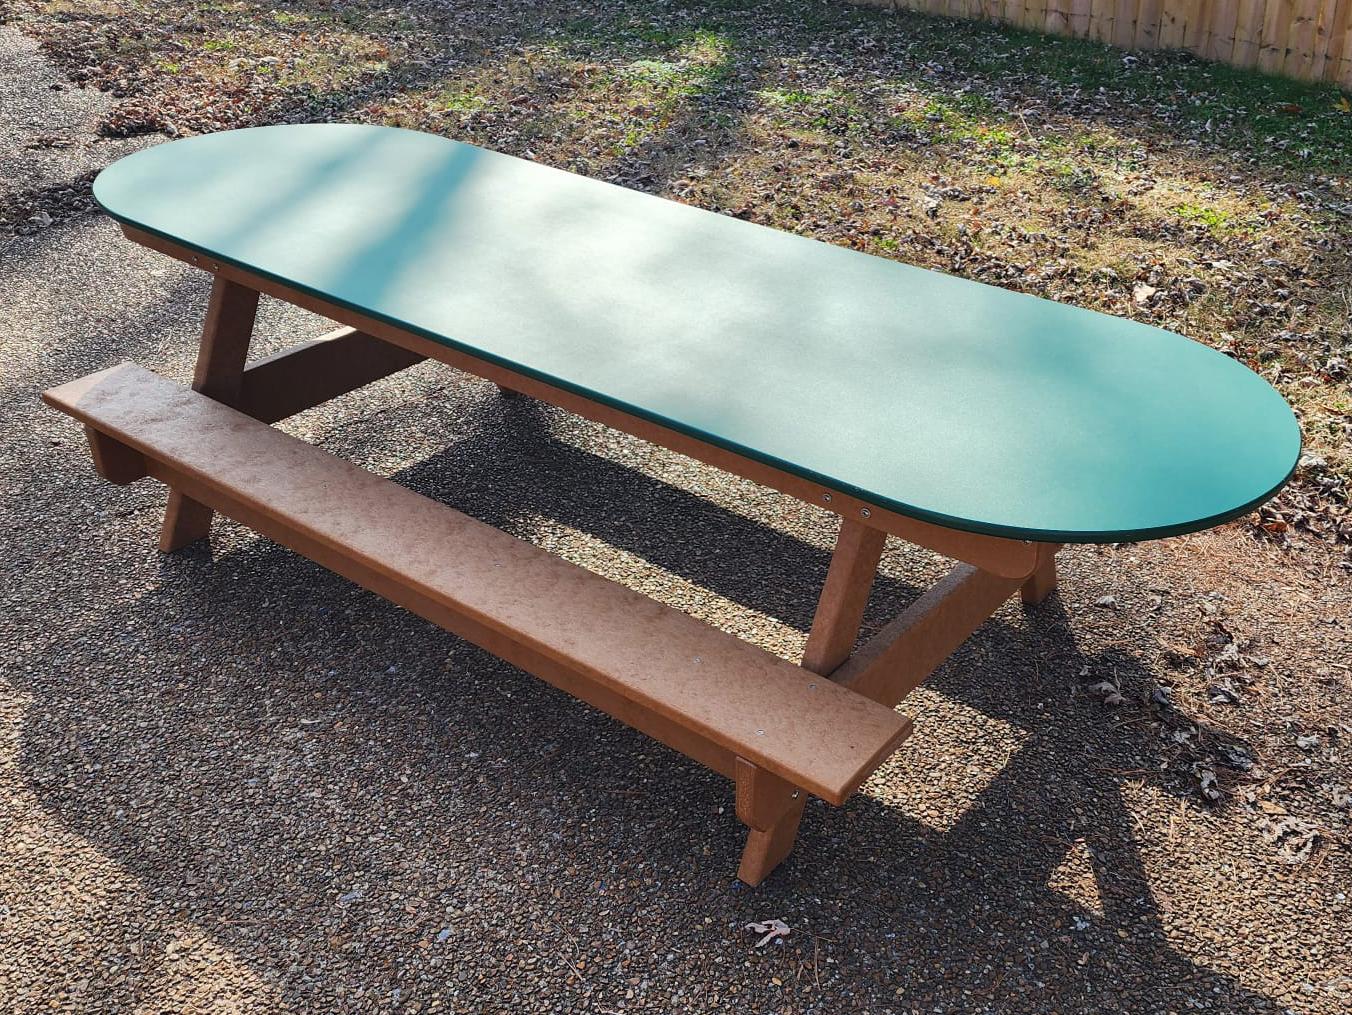 ADA Accessible Playground Picnic Table